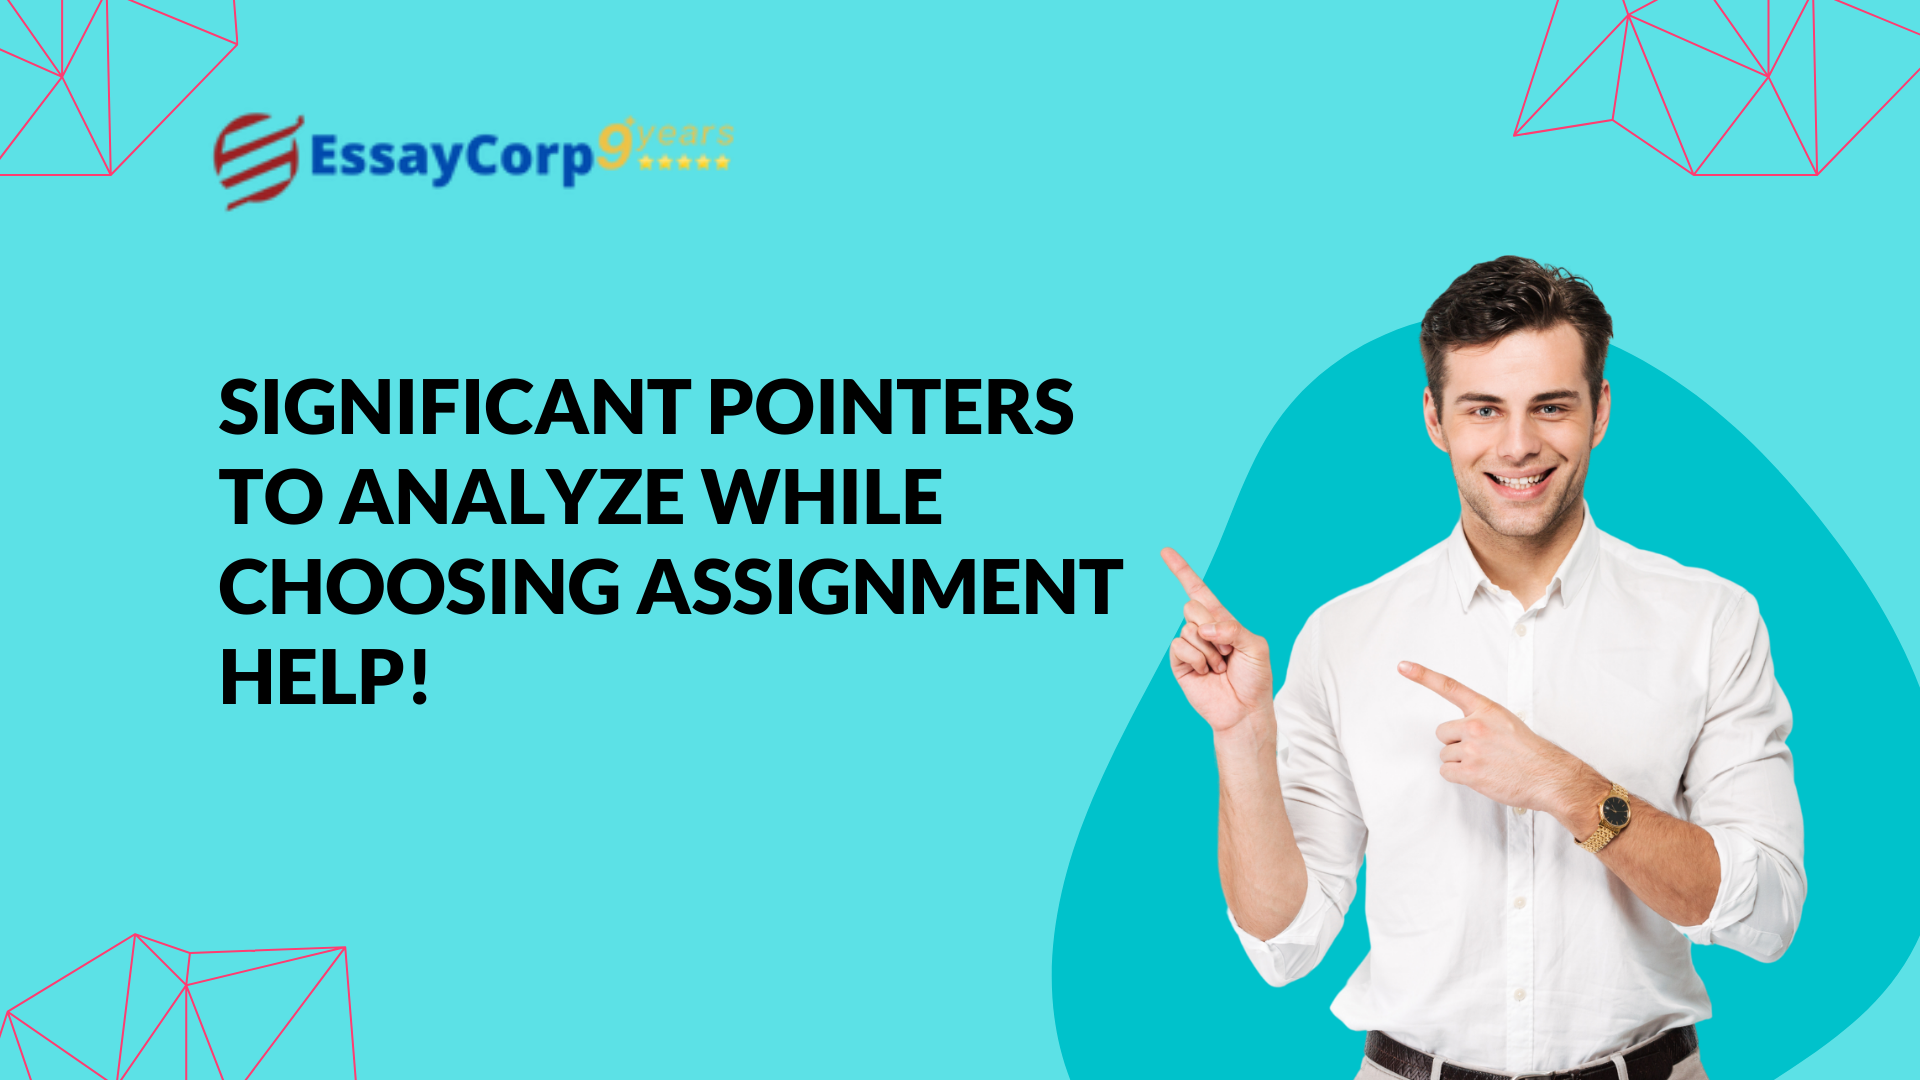 Significant Pointers to Analyze While Choosing Assignment Help!